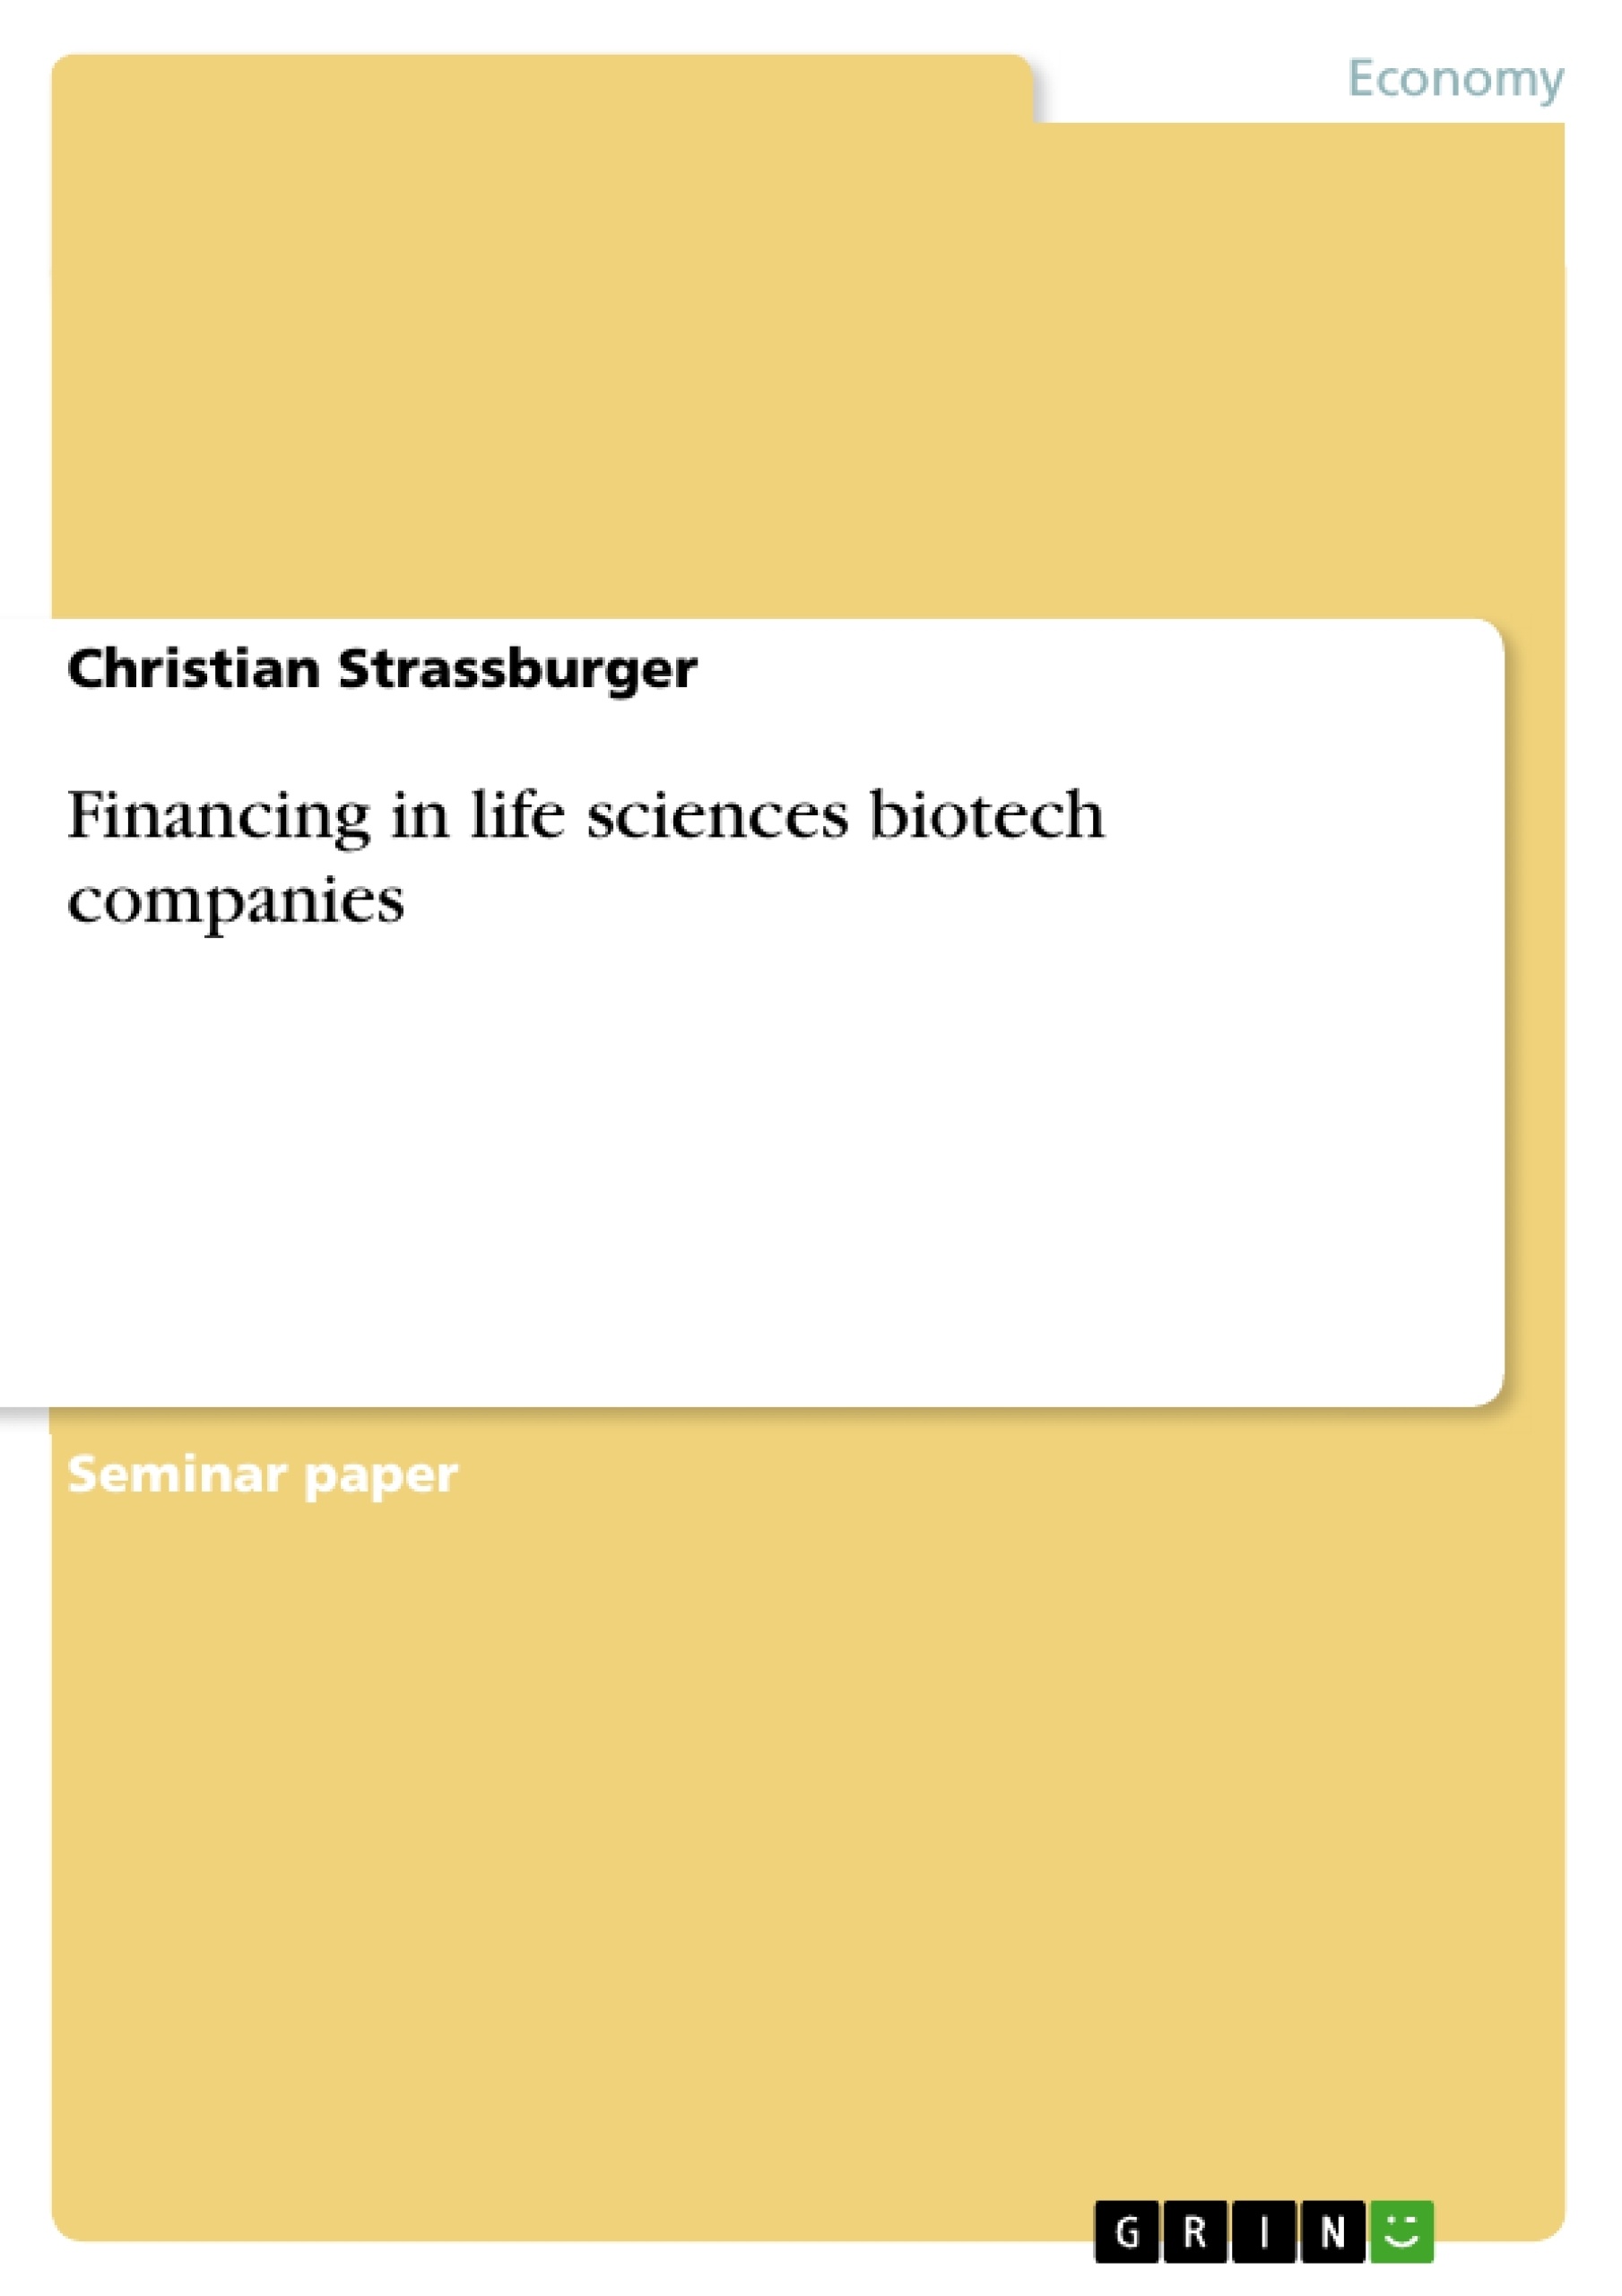 Title: Financing in life sciences biotech companies